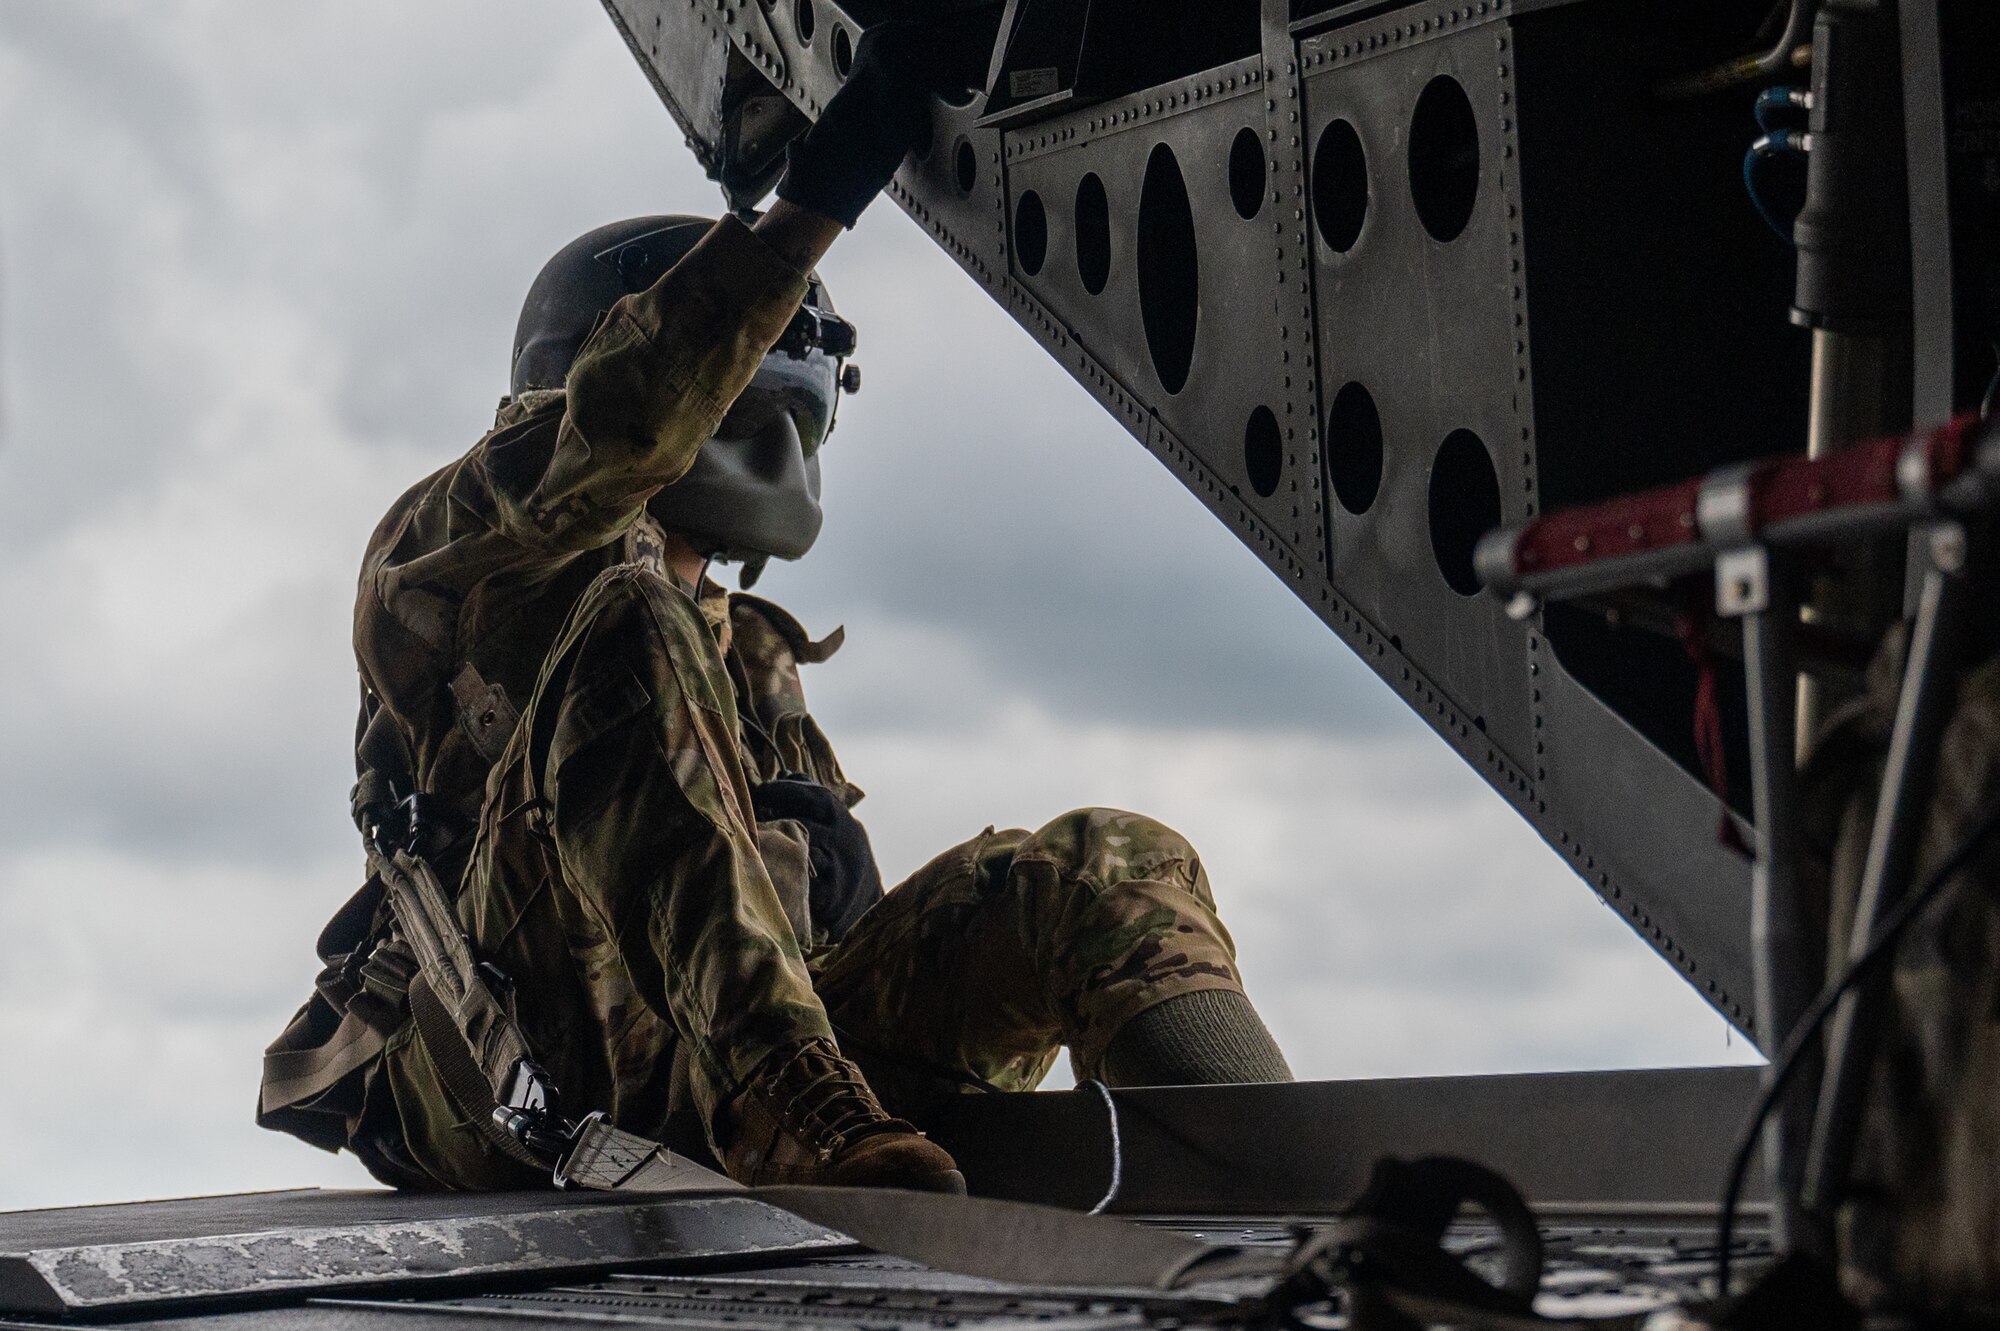 U.S. Army Spc. Joesph Reneau conducts a routine in flight inspection of the U.S. Army CH-47 Chinook while participating in a joint medical evacuation training,